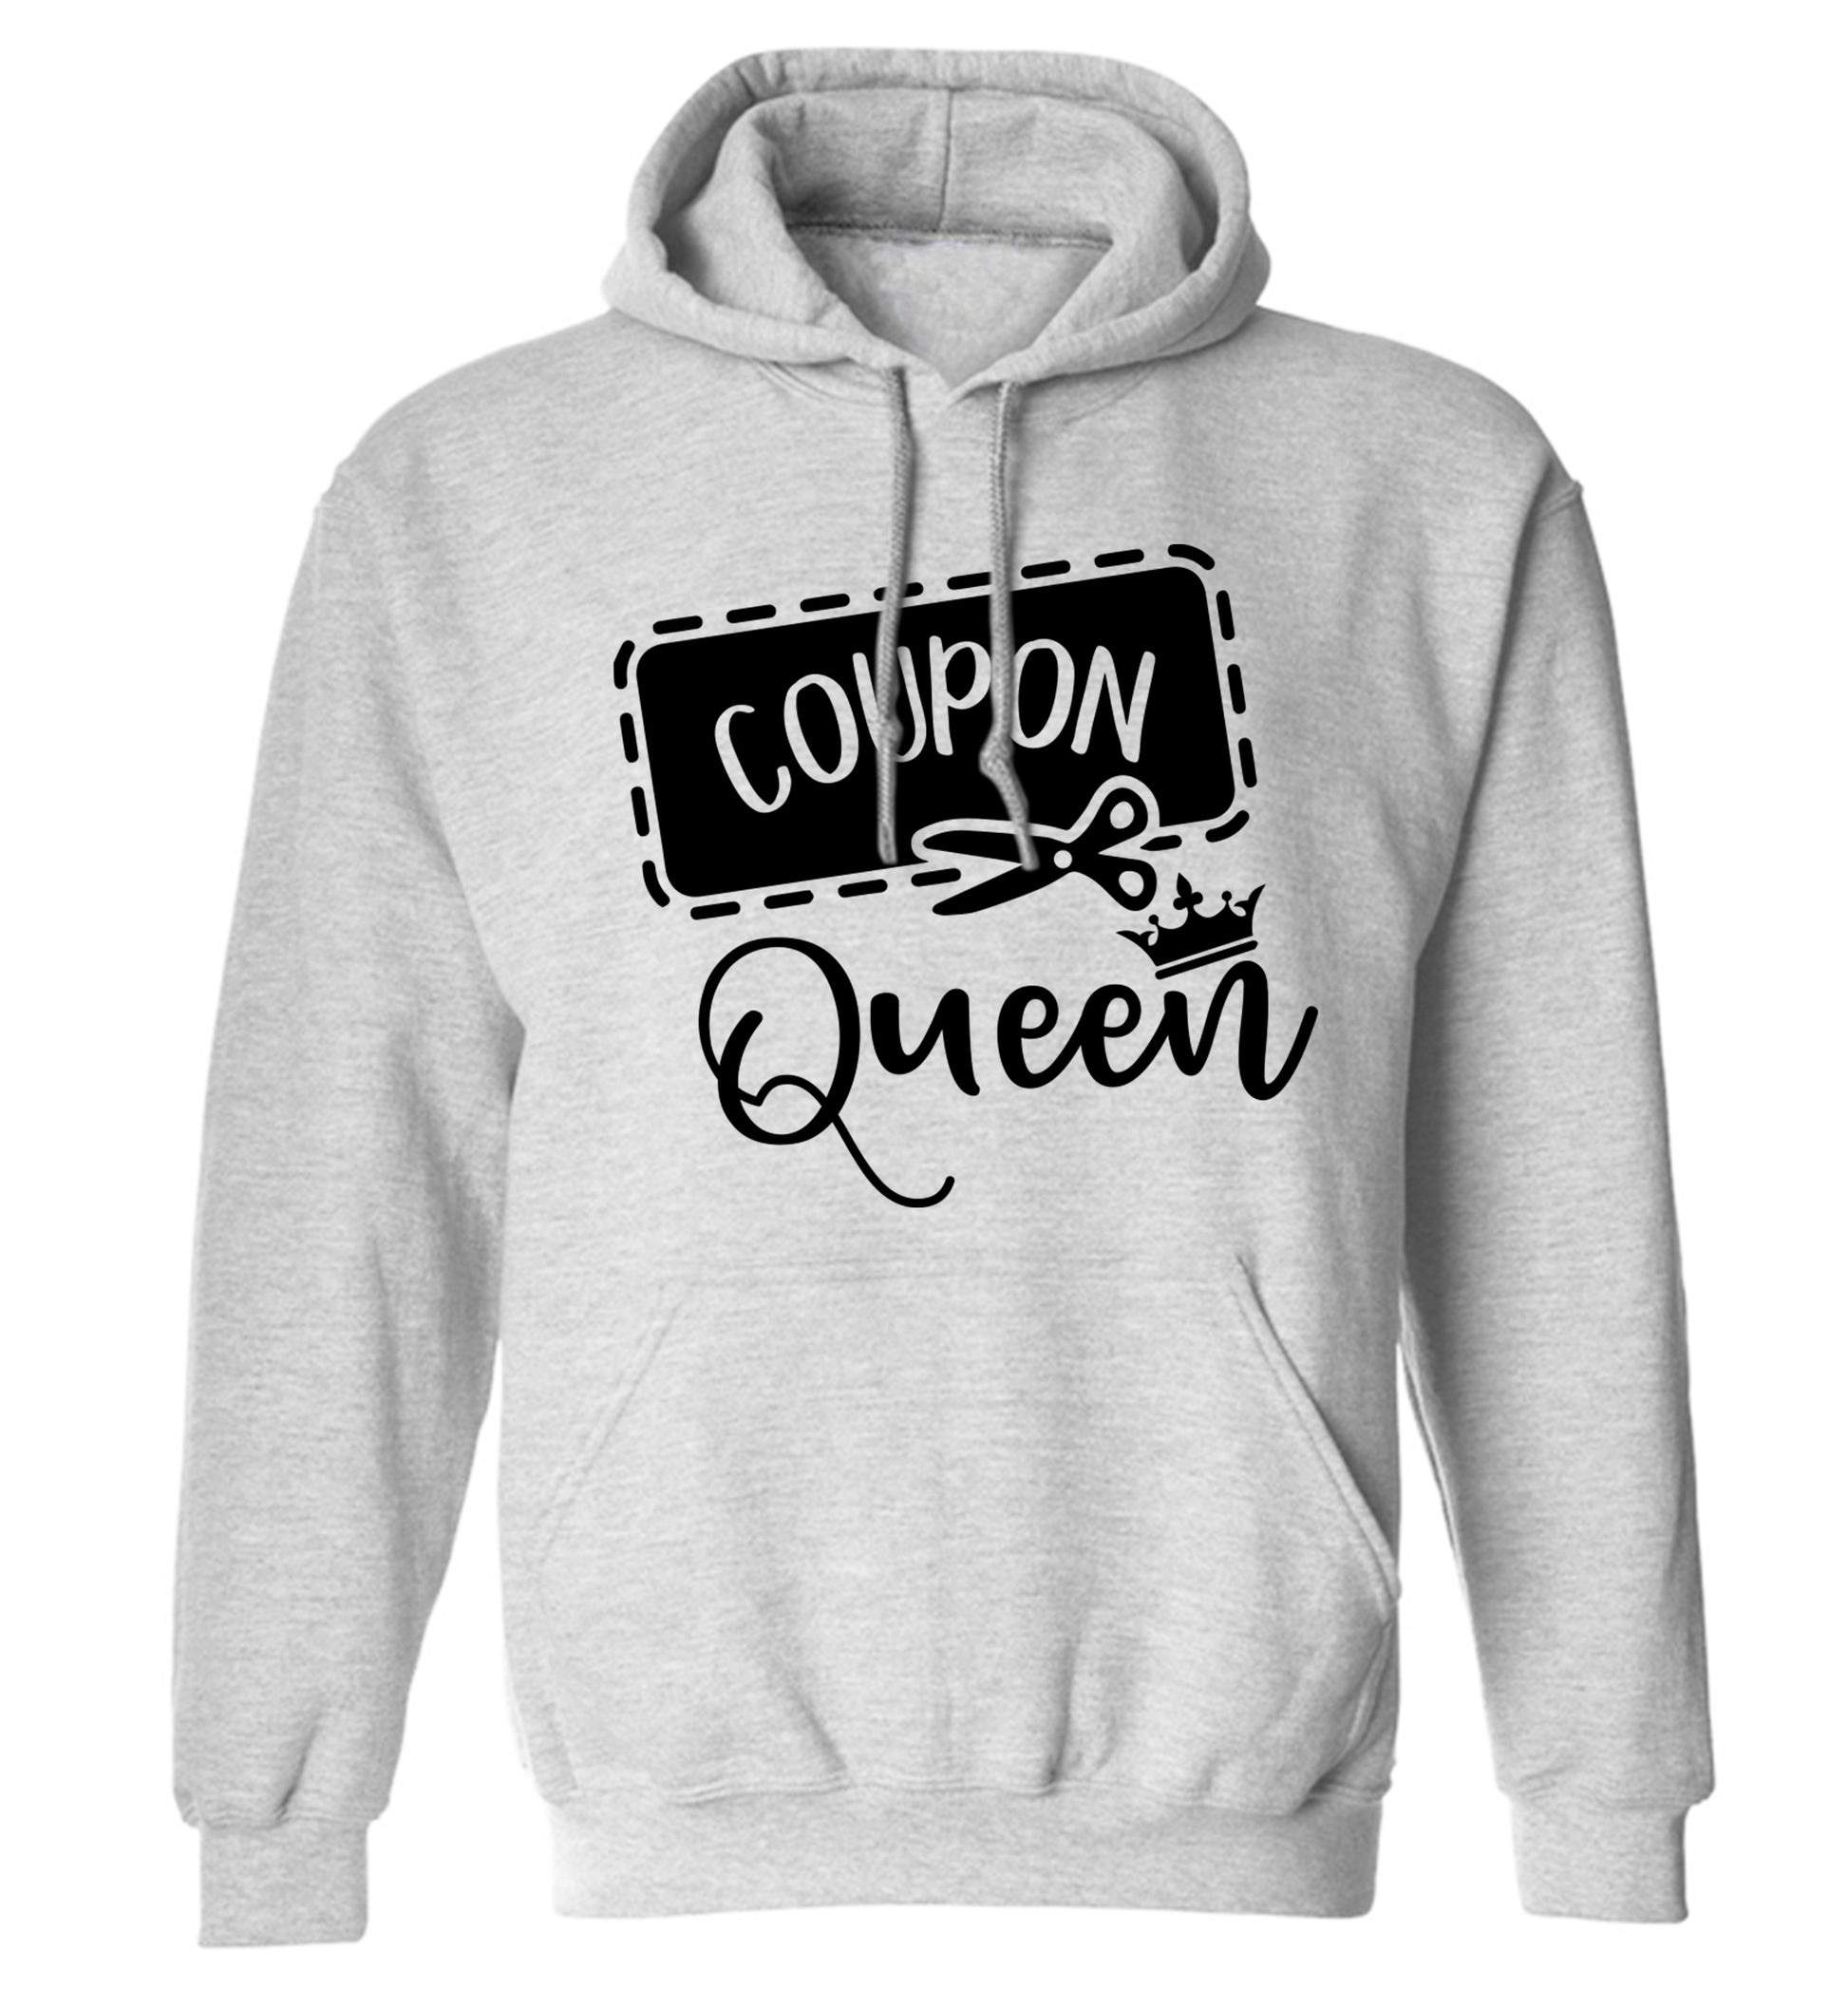 Coupon Queen adults unisex grey hoodie 2XL